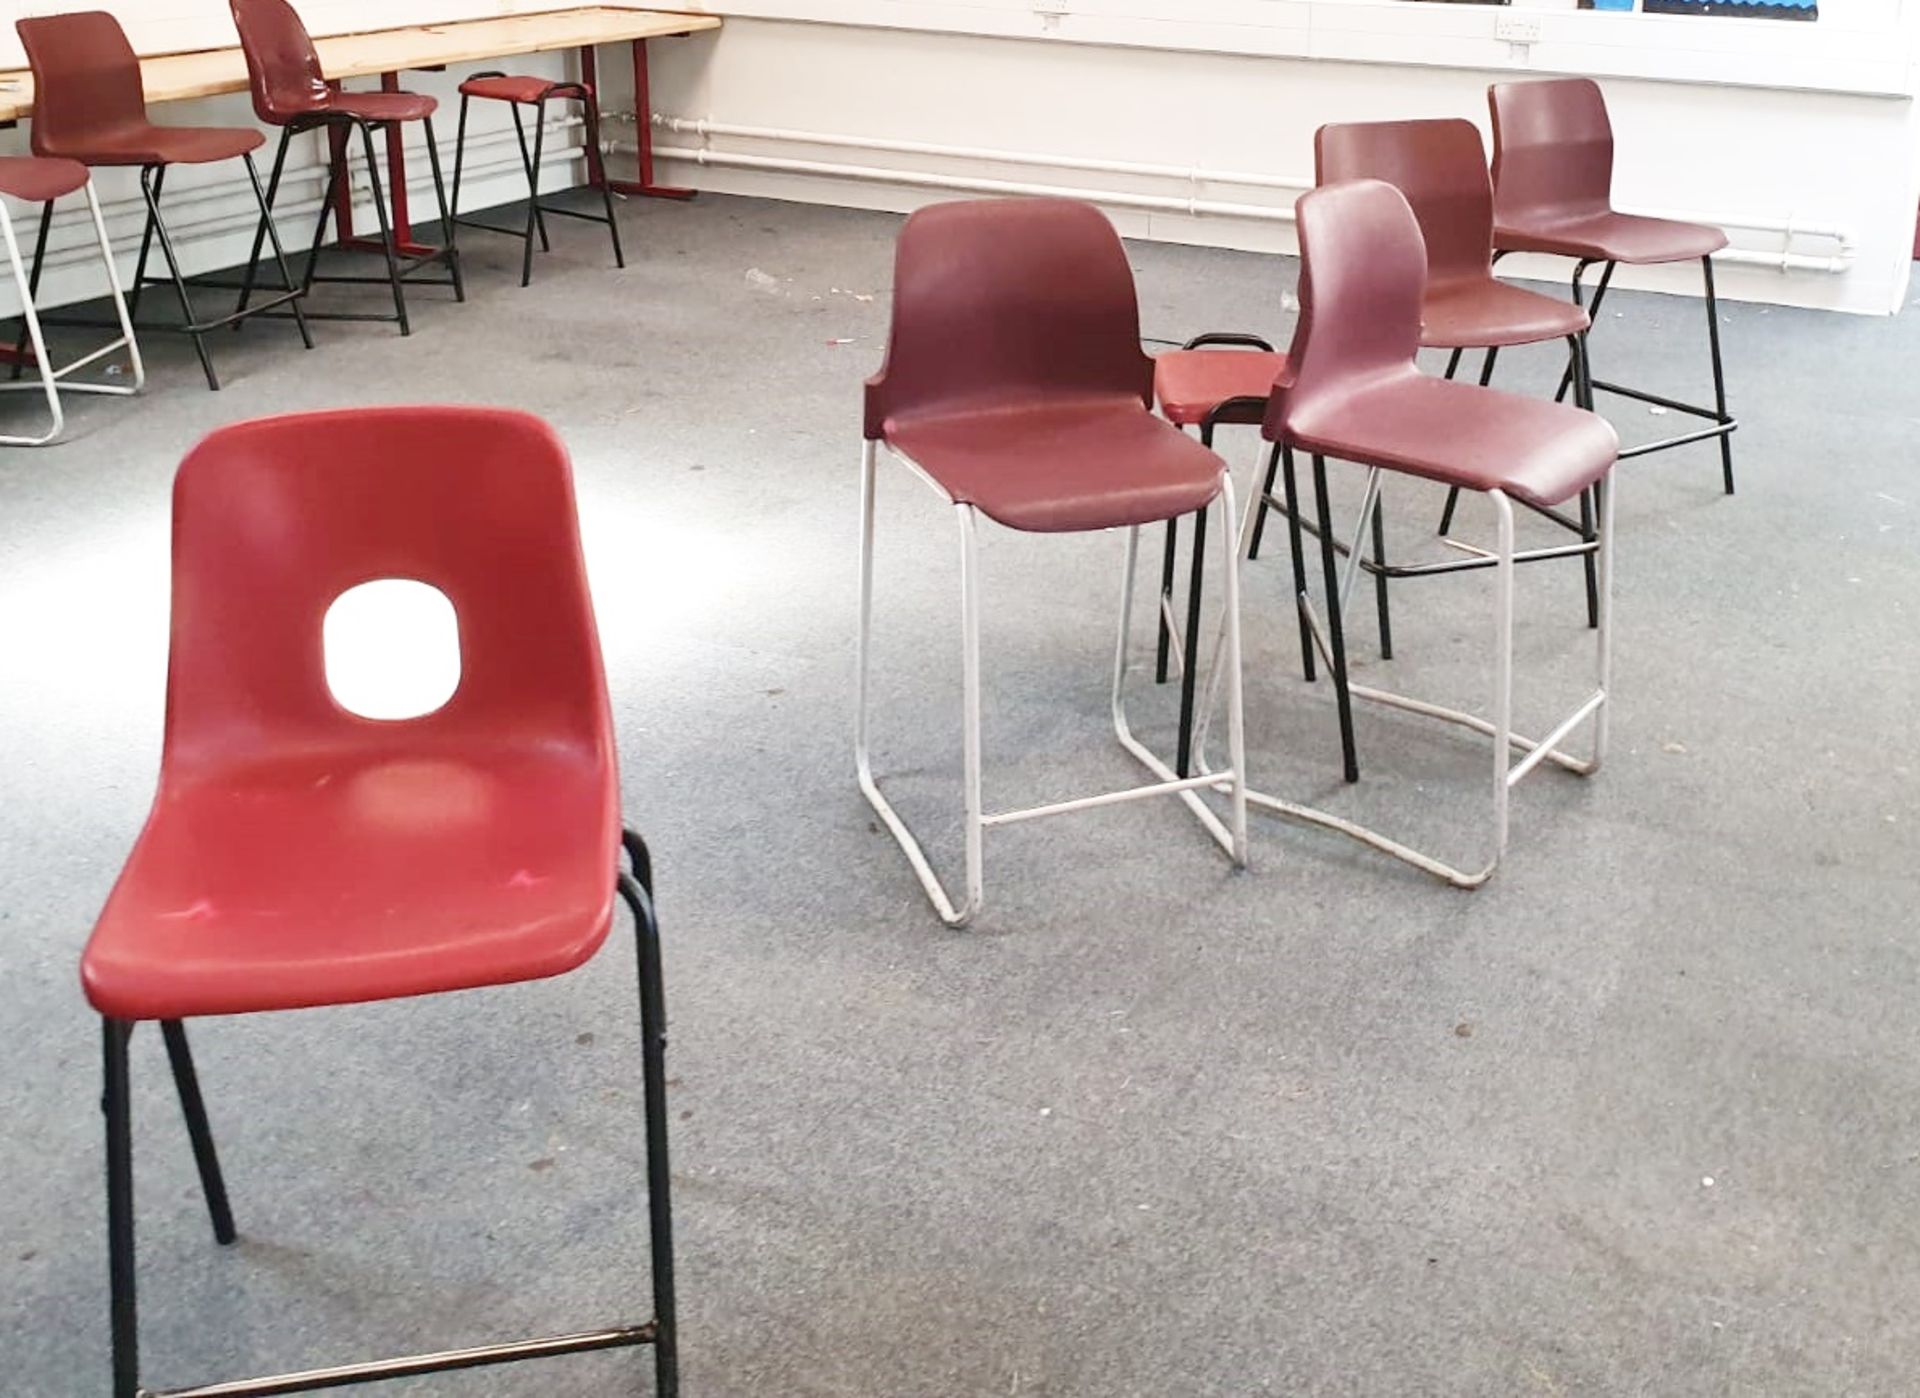 Approx 80 x Various Plastic School Chairs - In Red and Black - CL499 - Location: Borehamwood - Image 4 of 6